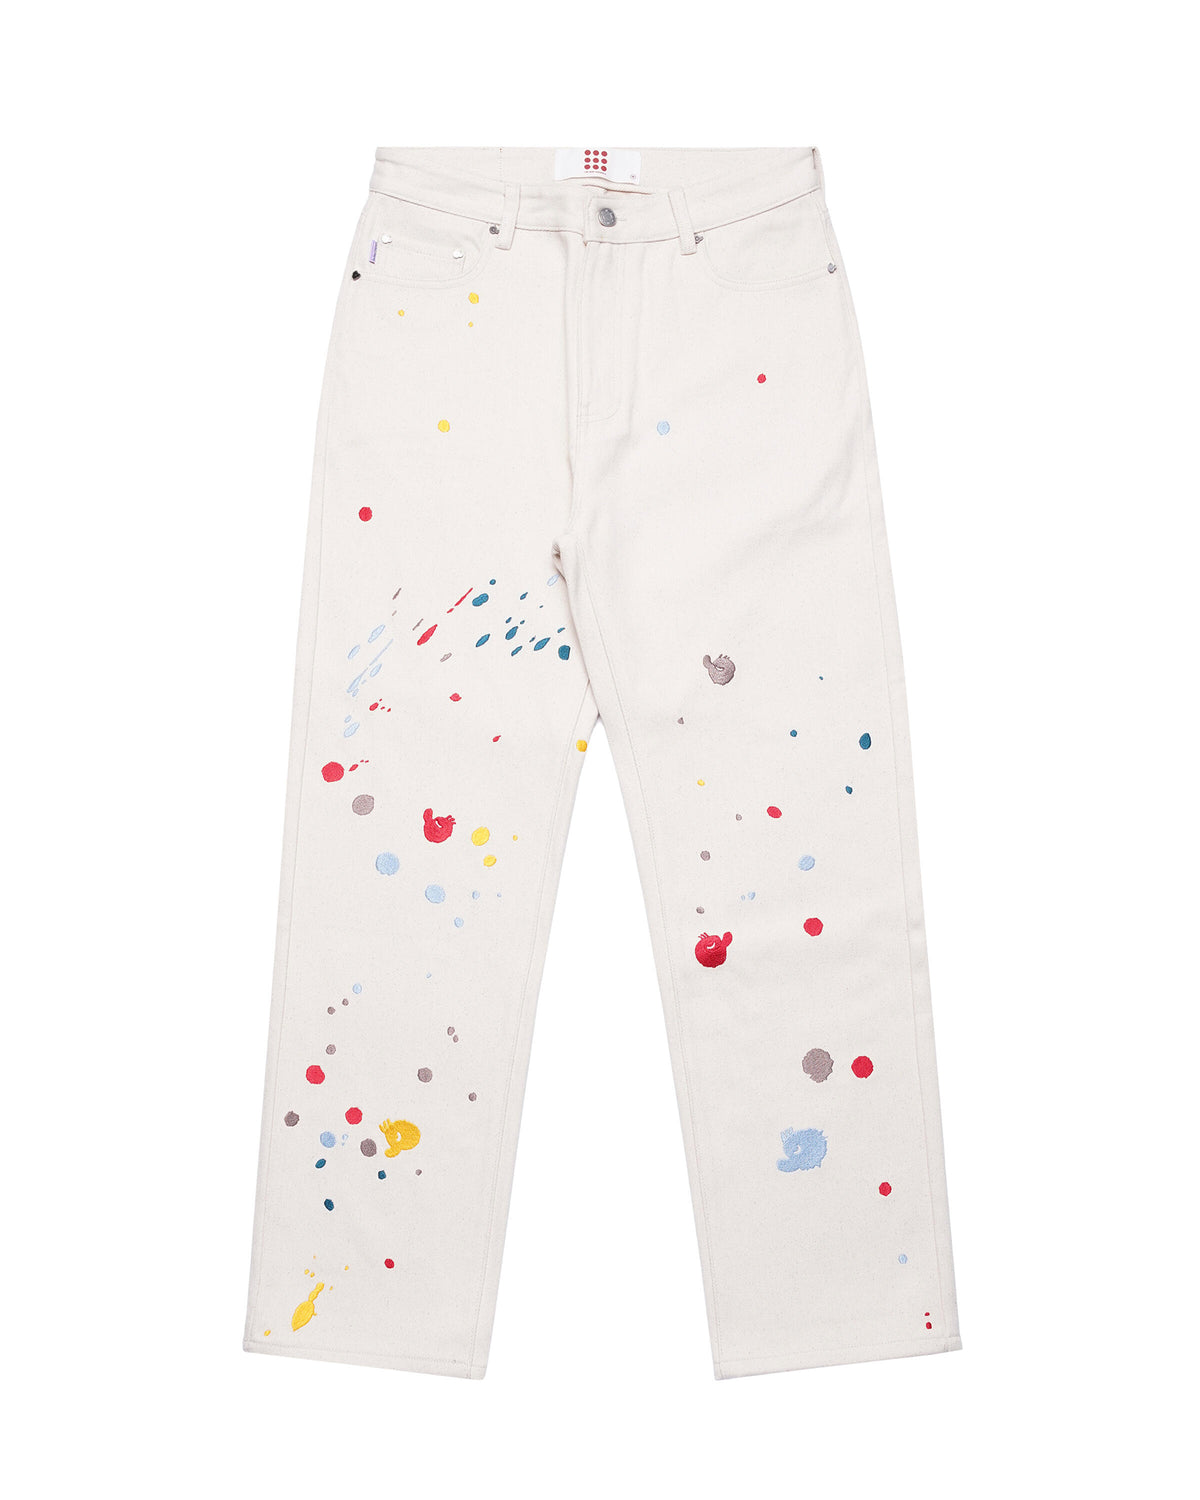 The New Originals Freddy Paint Jeans